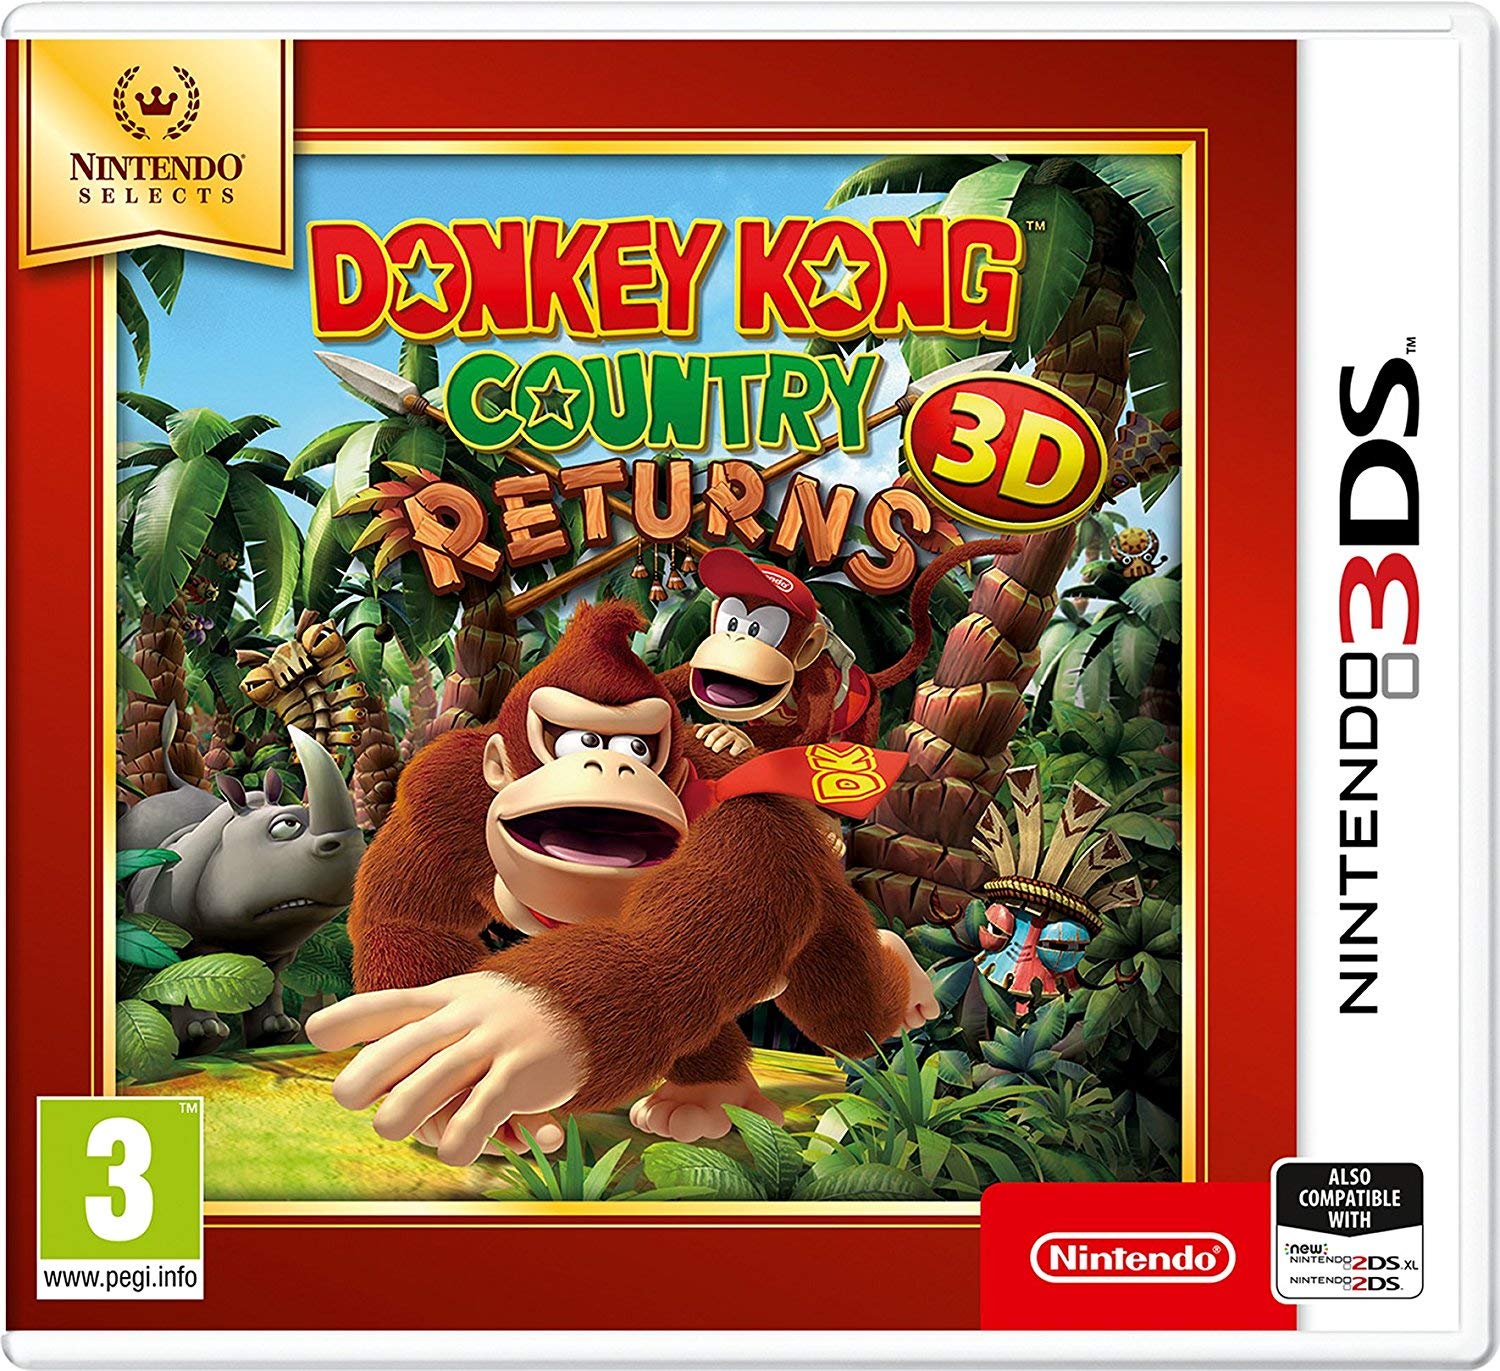 NINTENDO Selects - Donkey Kong Country Returns 3D (NINTENDO 3DS)